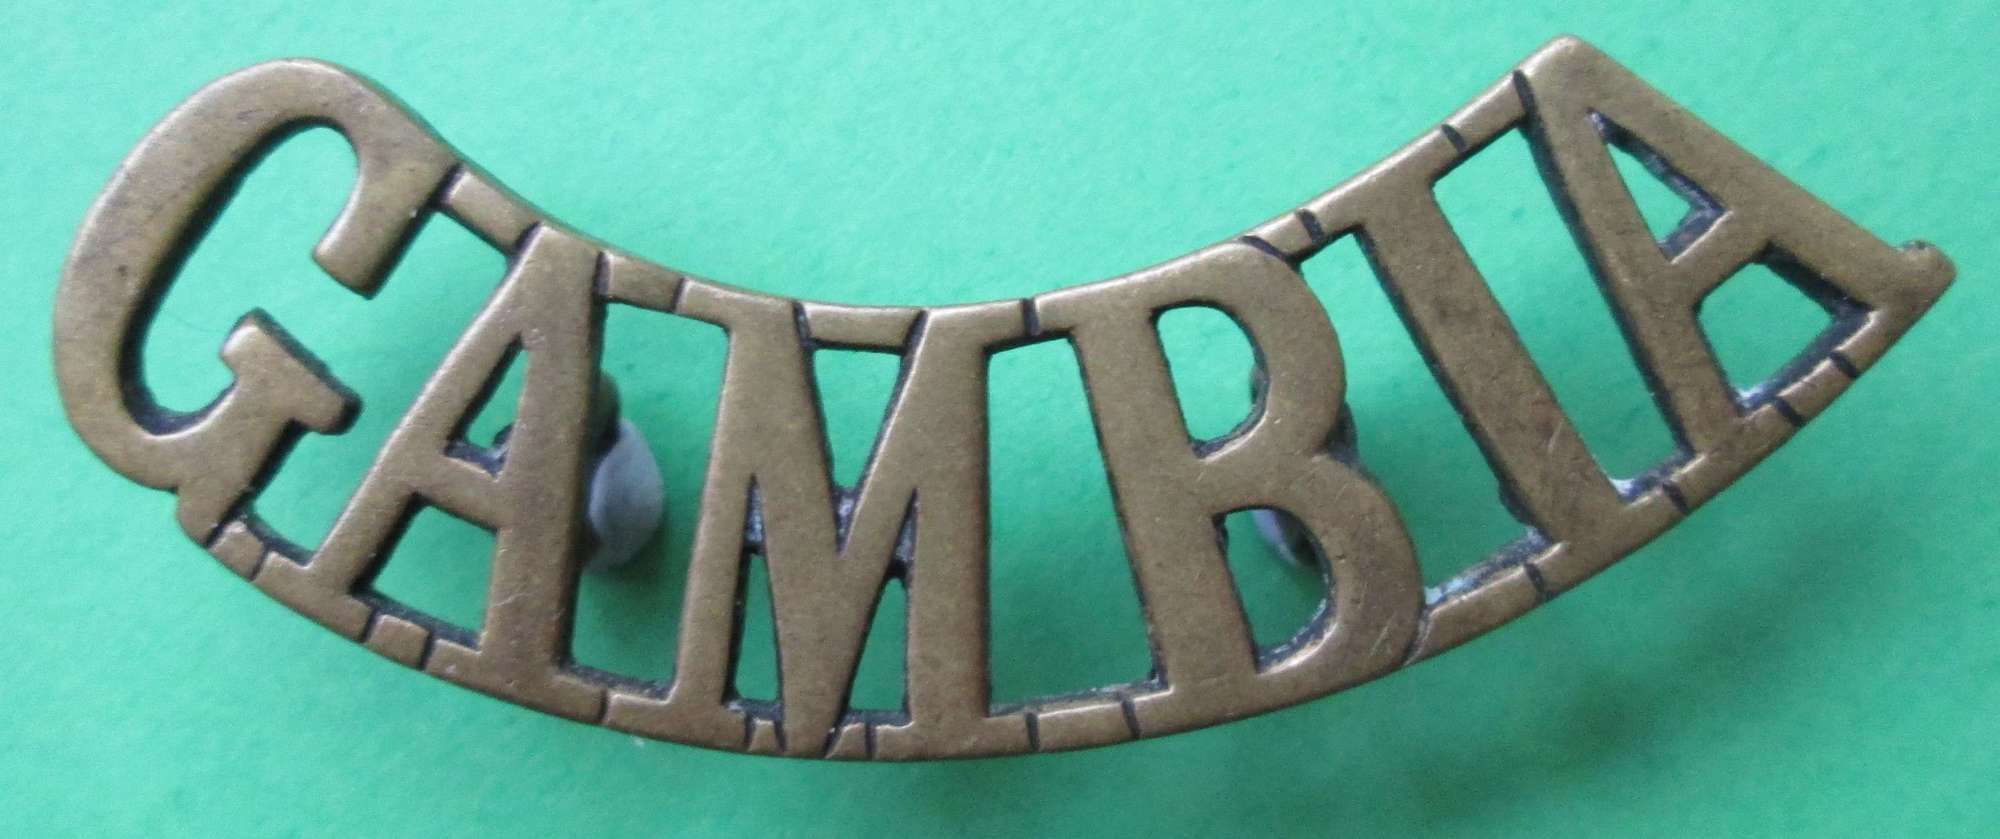 A WWII PERIOD SCARCE GAMBIA SHOULDER TITLE 2 AVLABLE